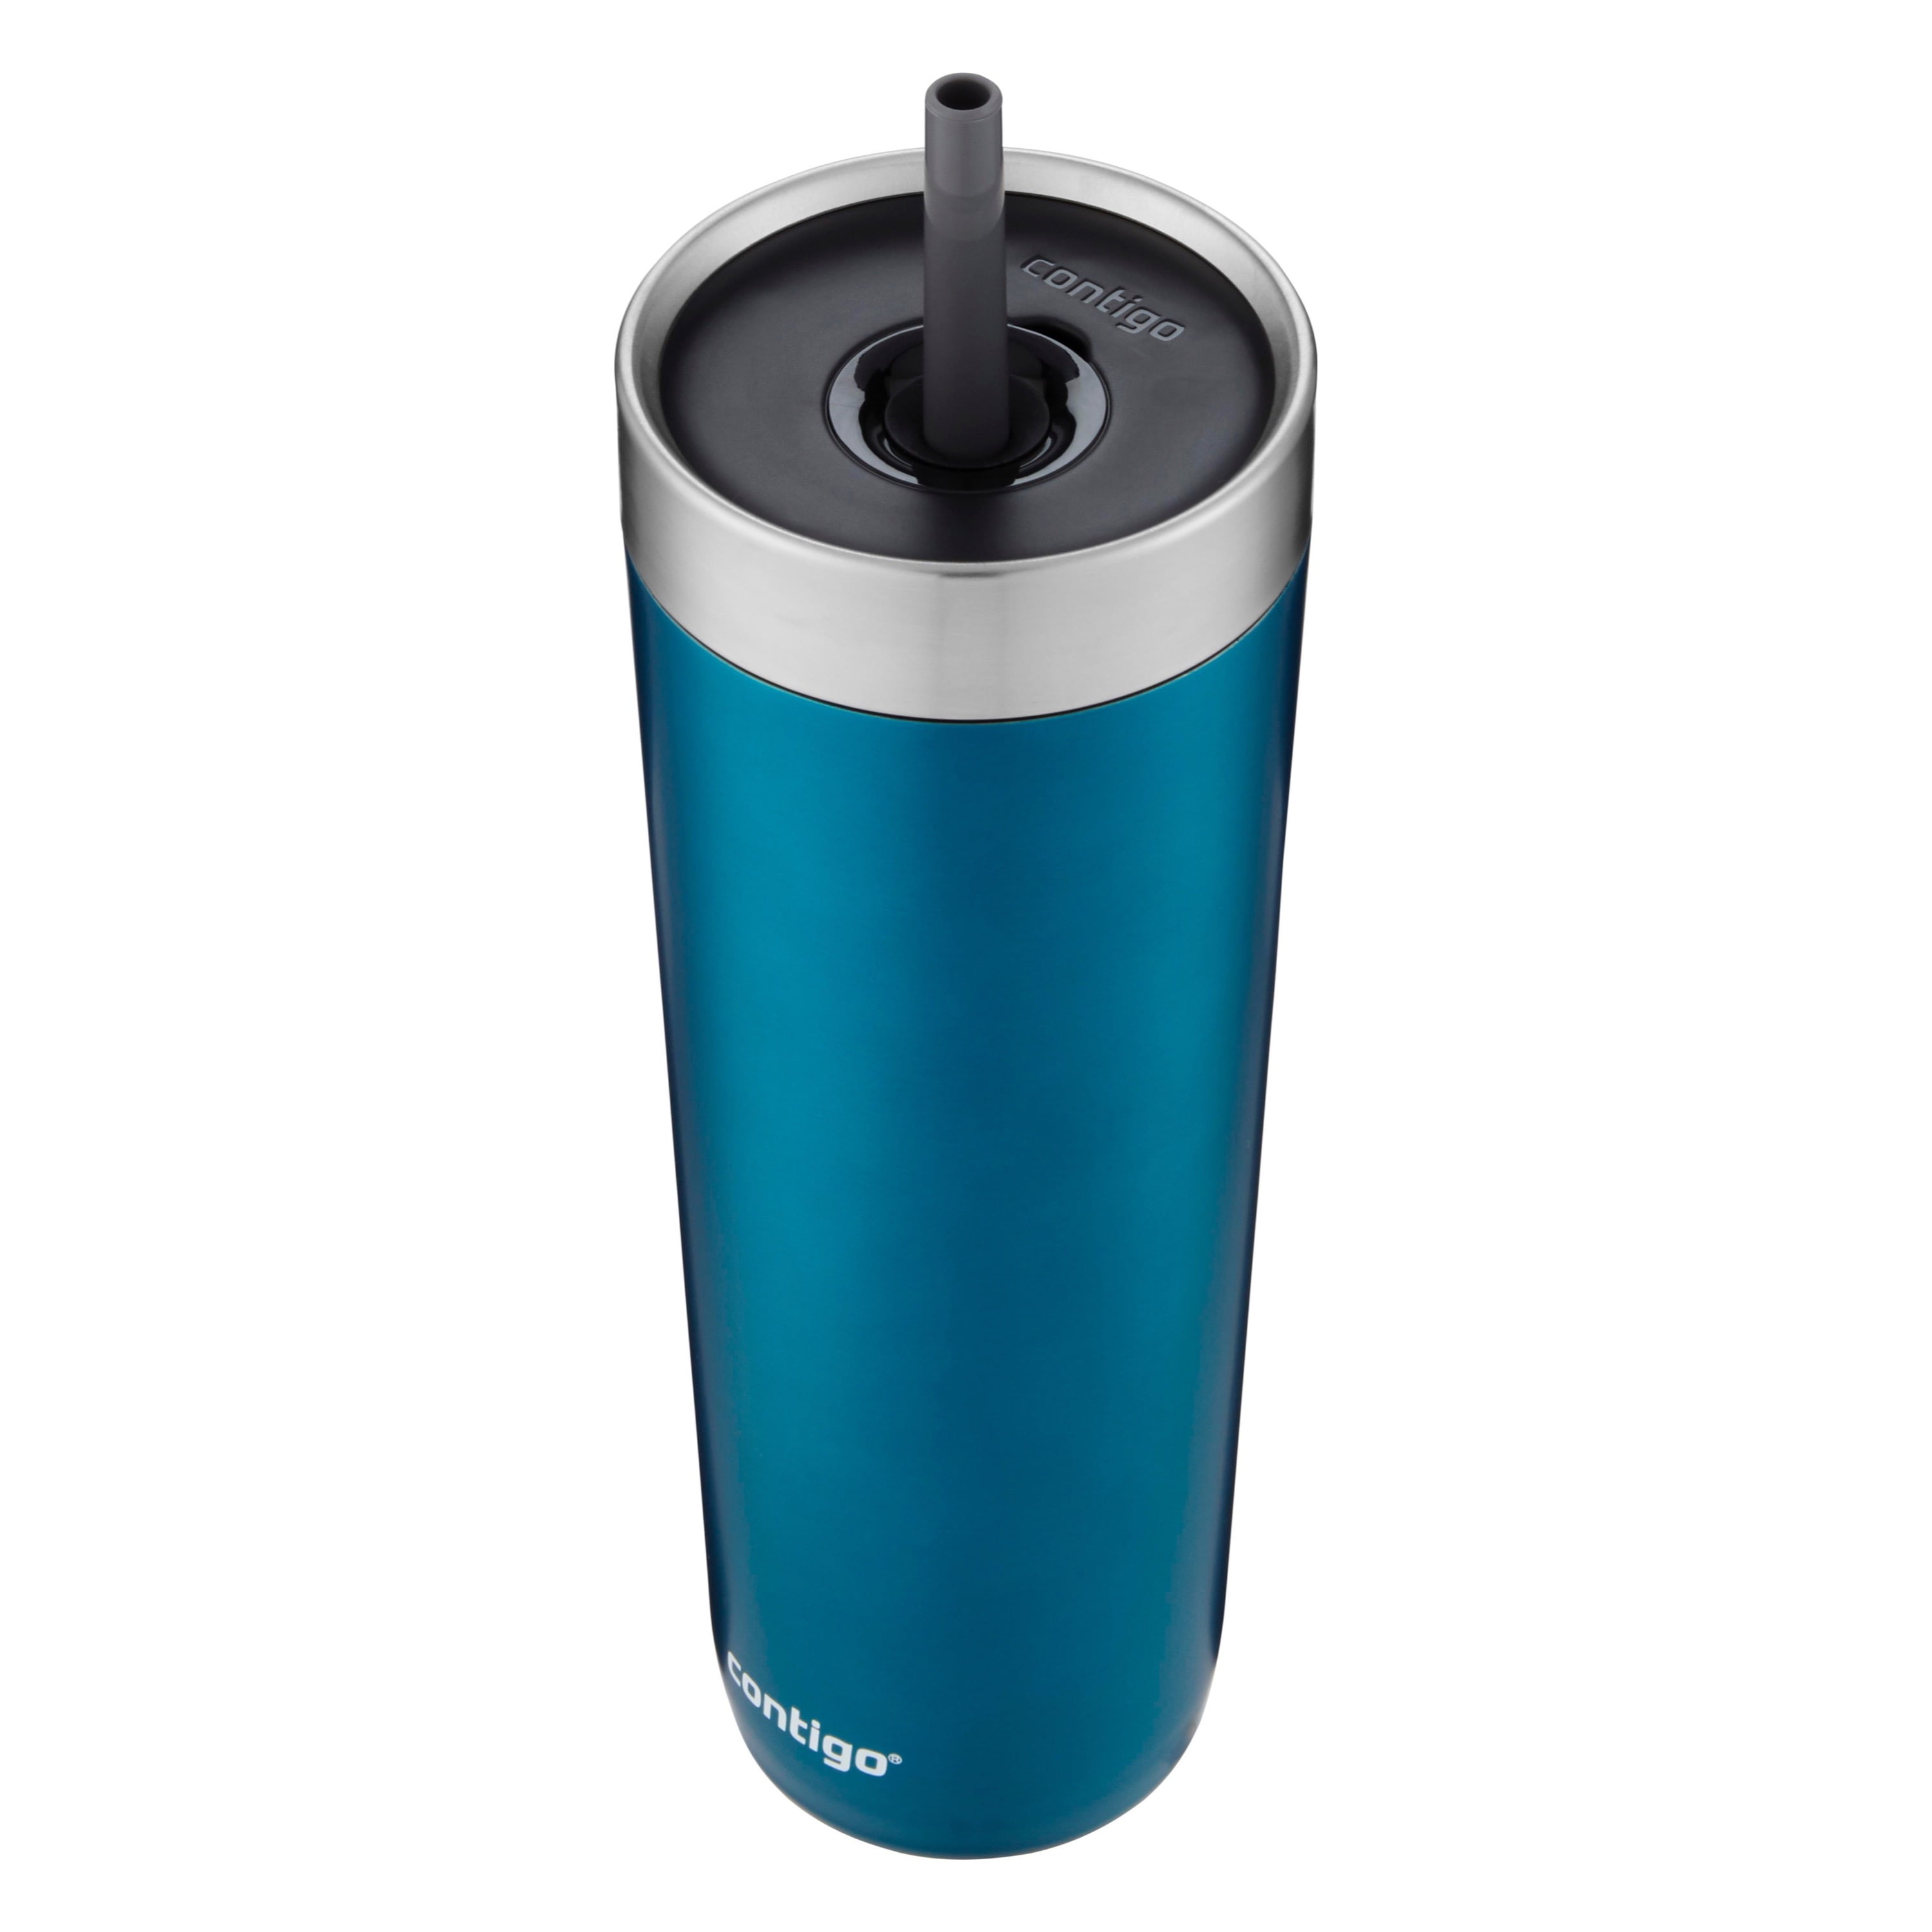 Contigo - Introducing the Contigo LUXE Collection, elegantly designed to  stop spills. Sip confidently:  AUTOSEAL® technology  is 100% leak and spill-proof. Keeps drinks hot up to 5 hours and cold up